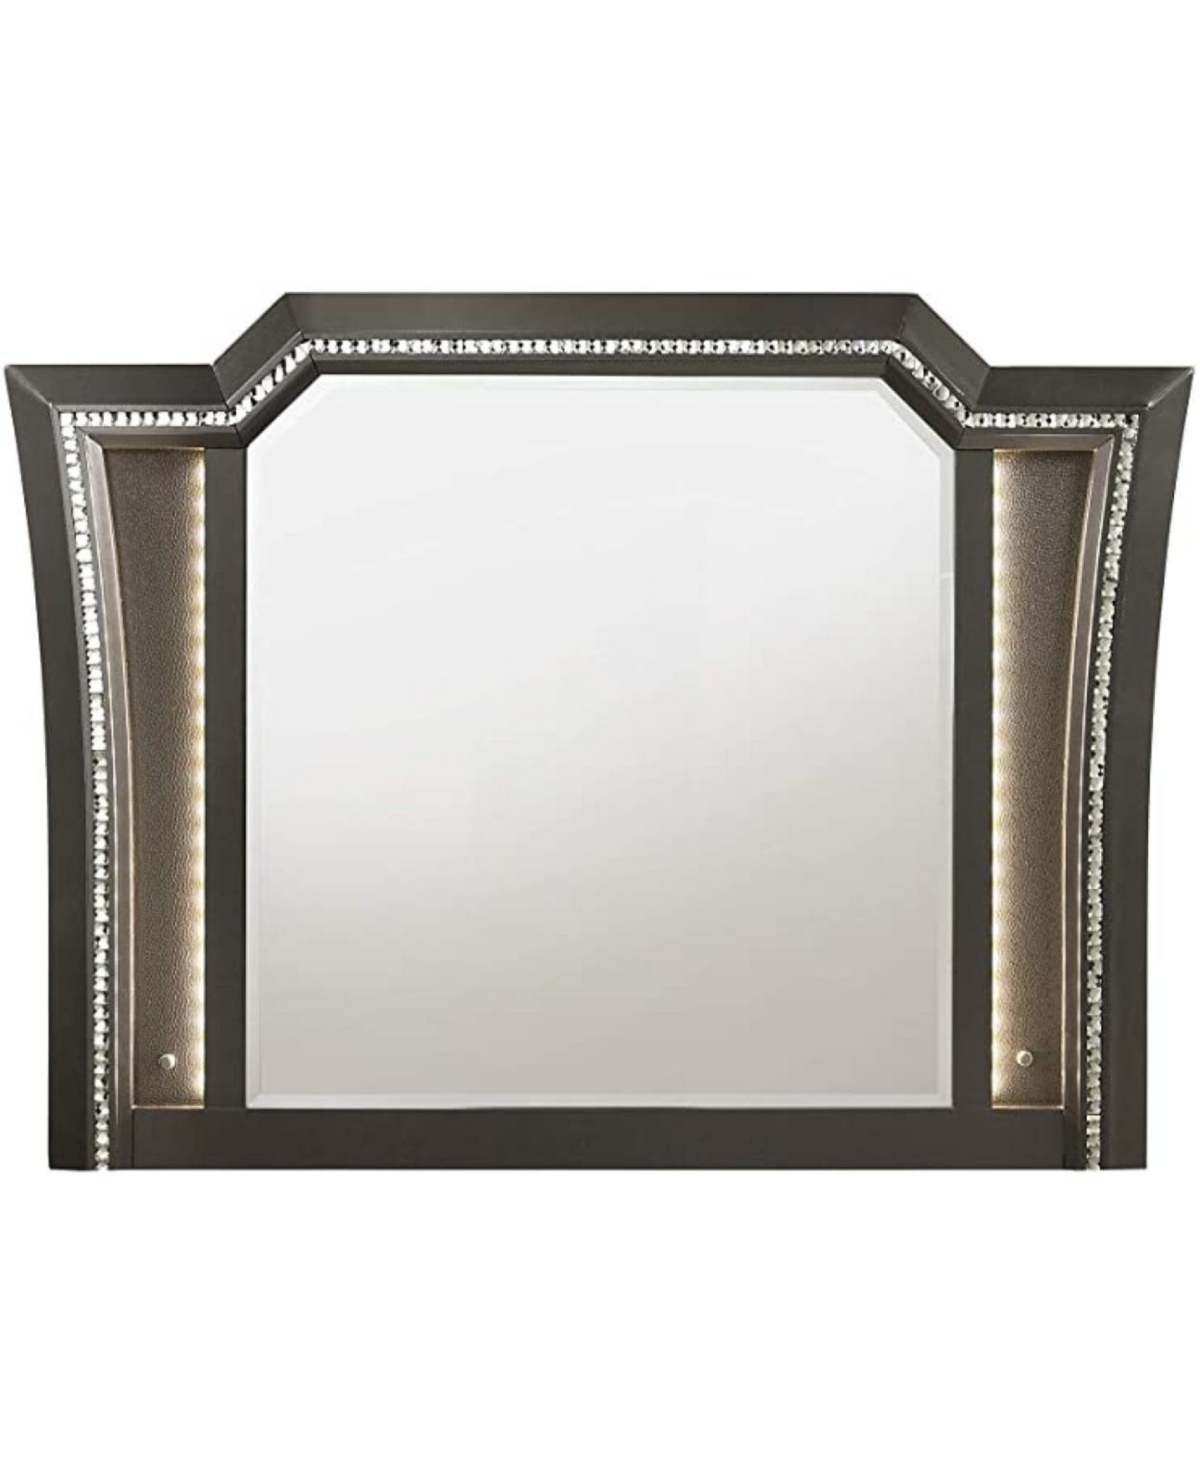 Kaitlyn Mirror In Led & Champagne - Grey